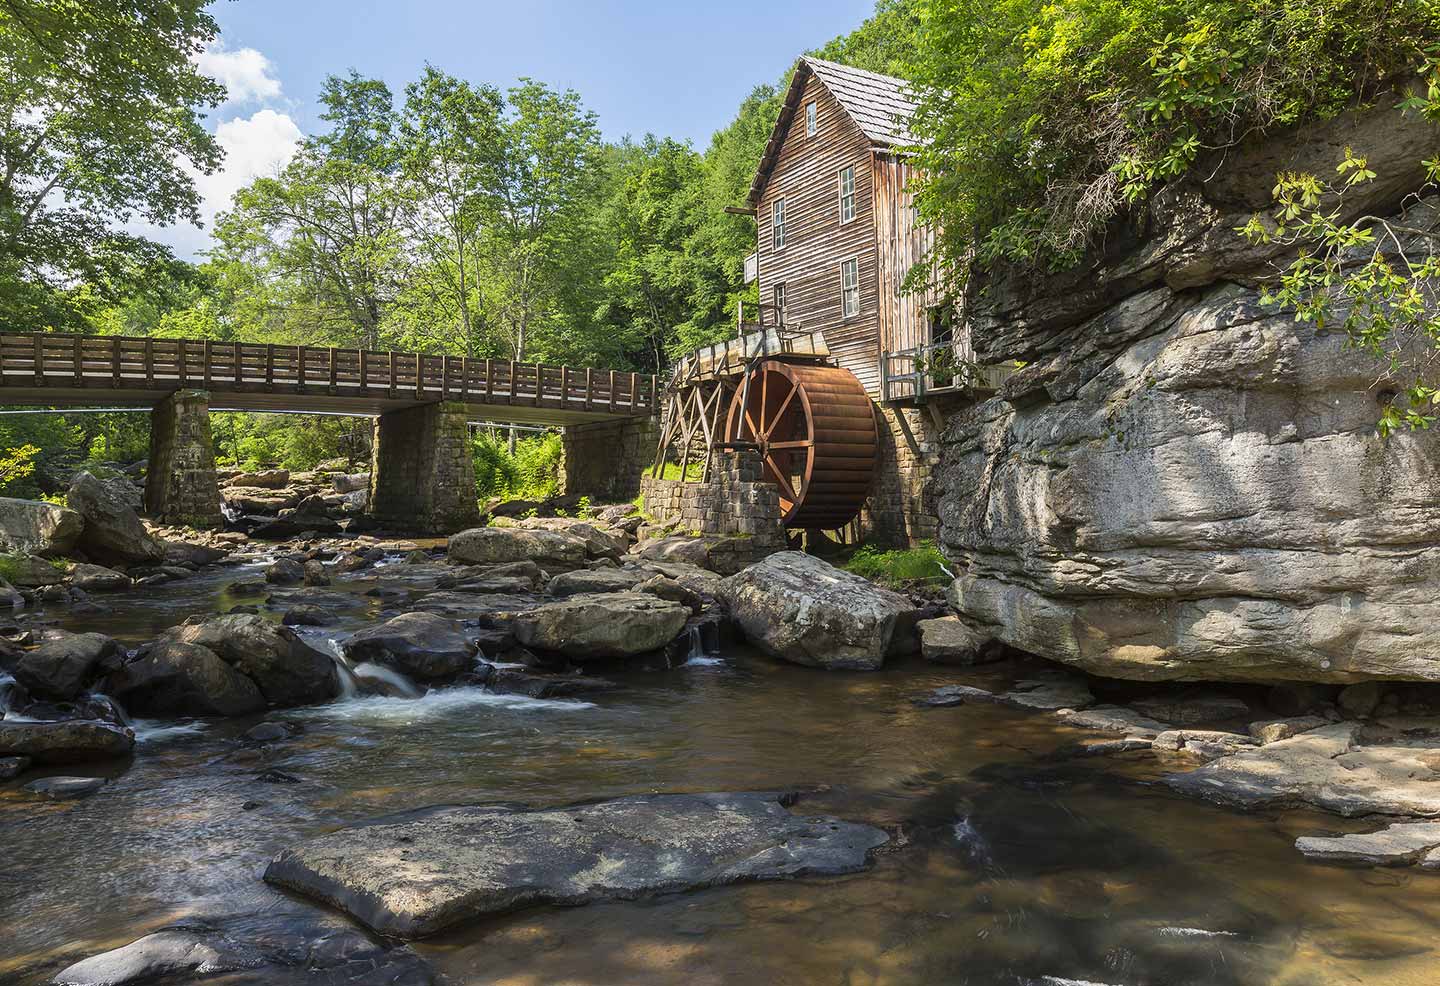 A photograph of Glade Creek Grist Mill, located in West Virginia.